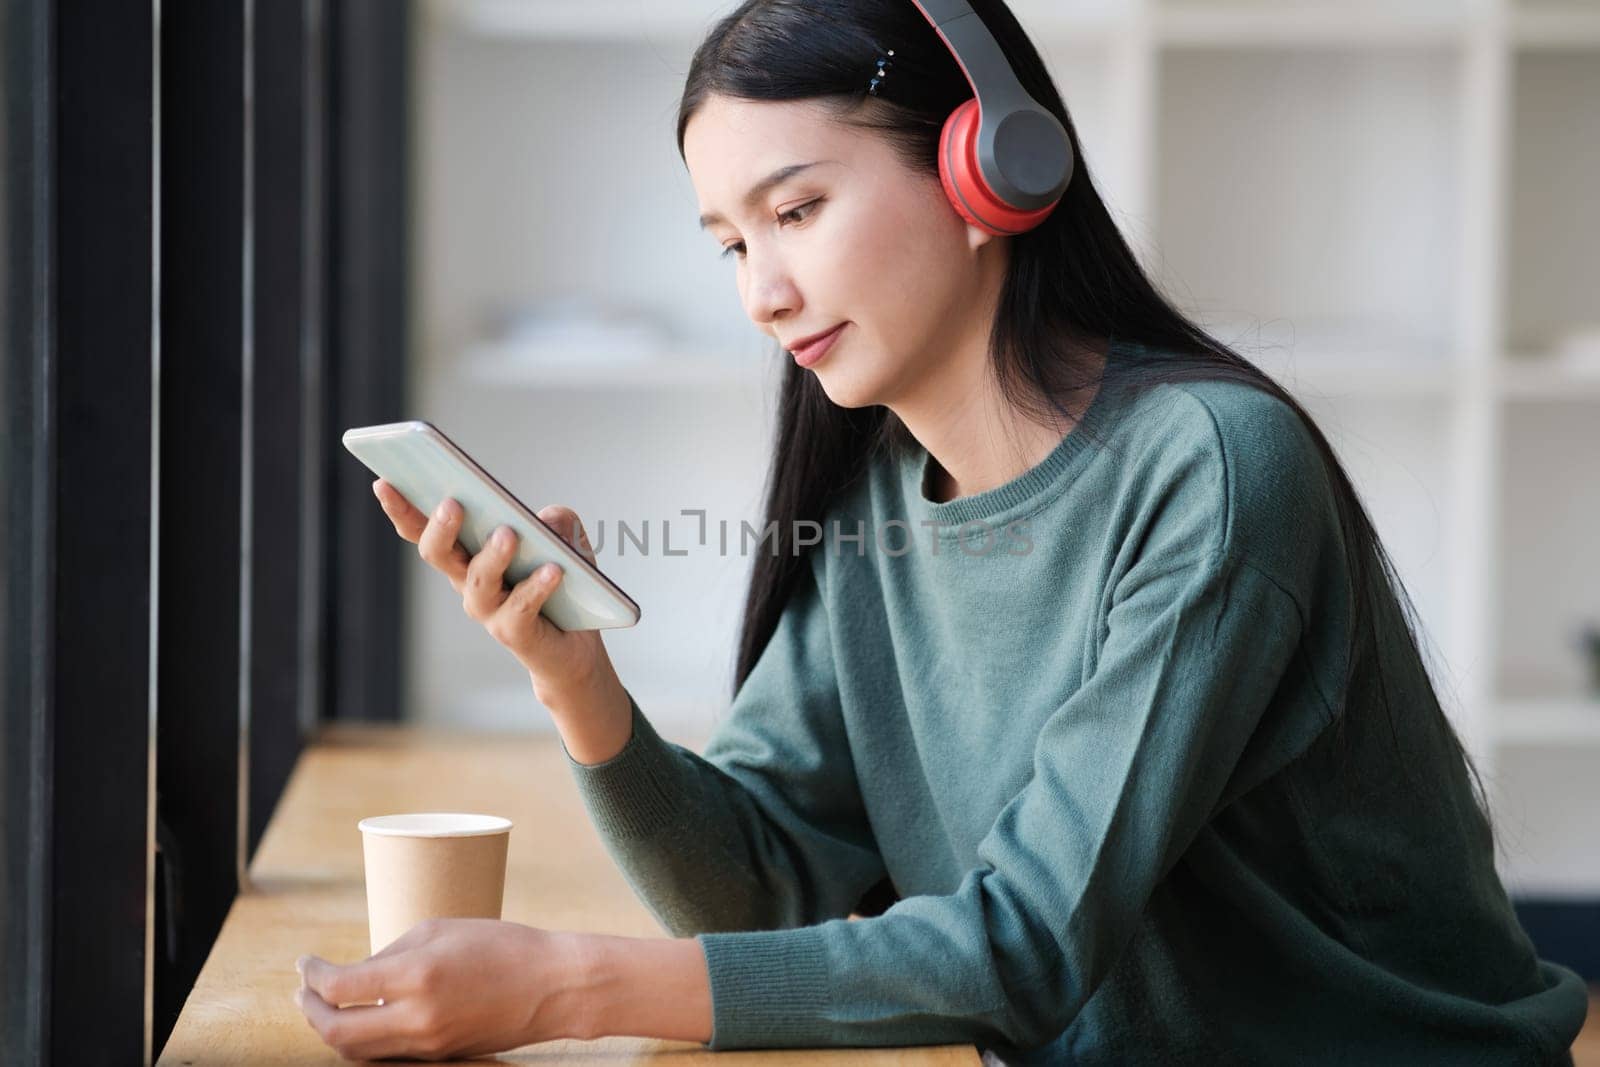 A woman is sitting at a table with a cell phone and a cup of coffee. She is wearing headphones and she is listening to music